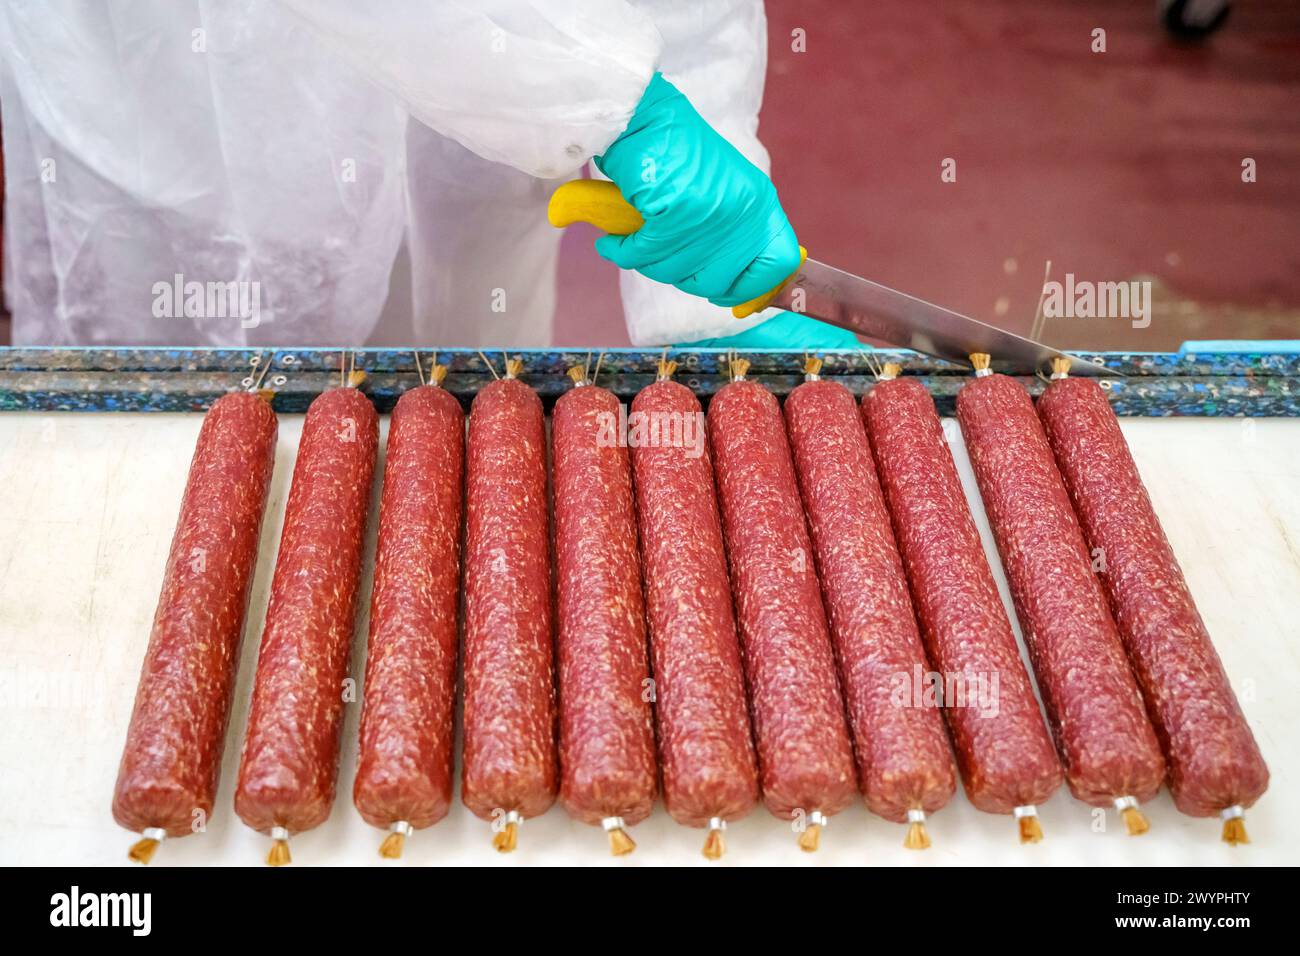 Salami sausage production at a meat factory. Pork and beef sausage salami industry. High quality photo Stock Photo